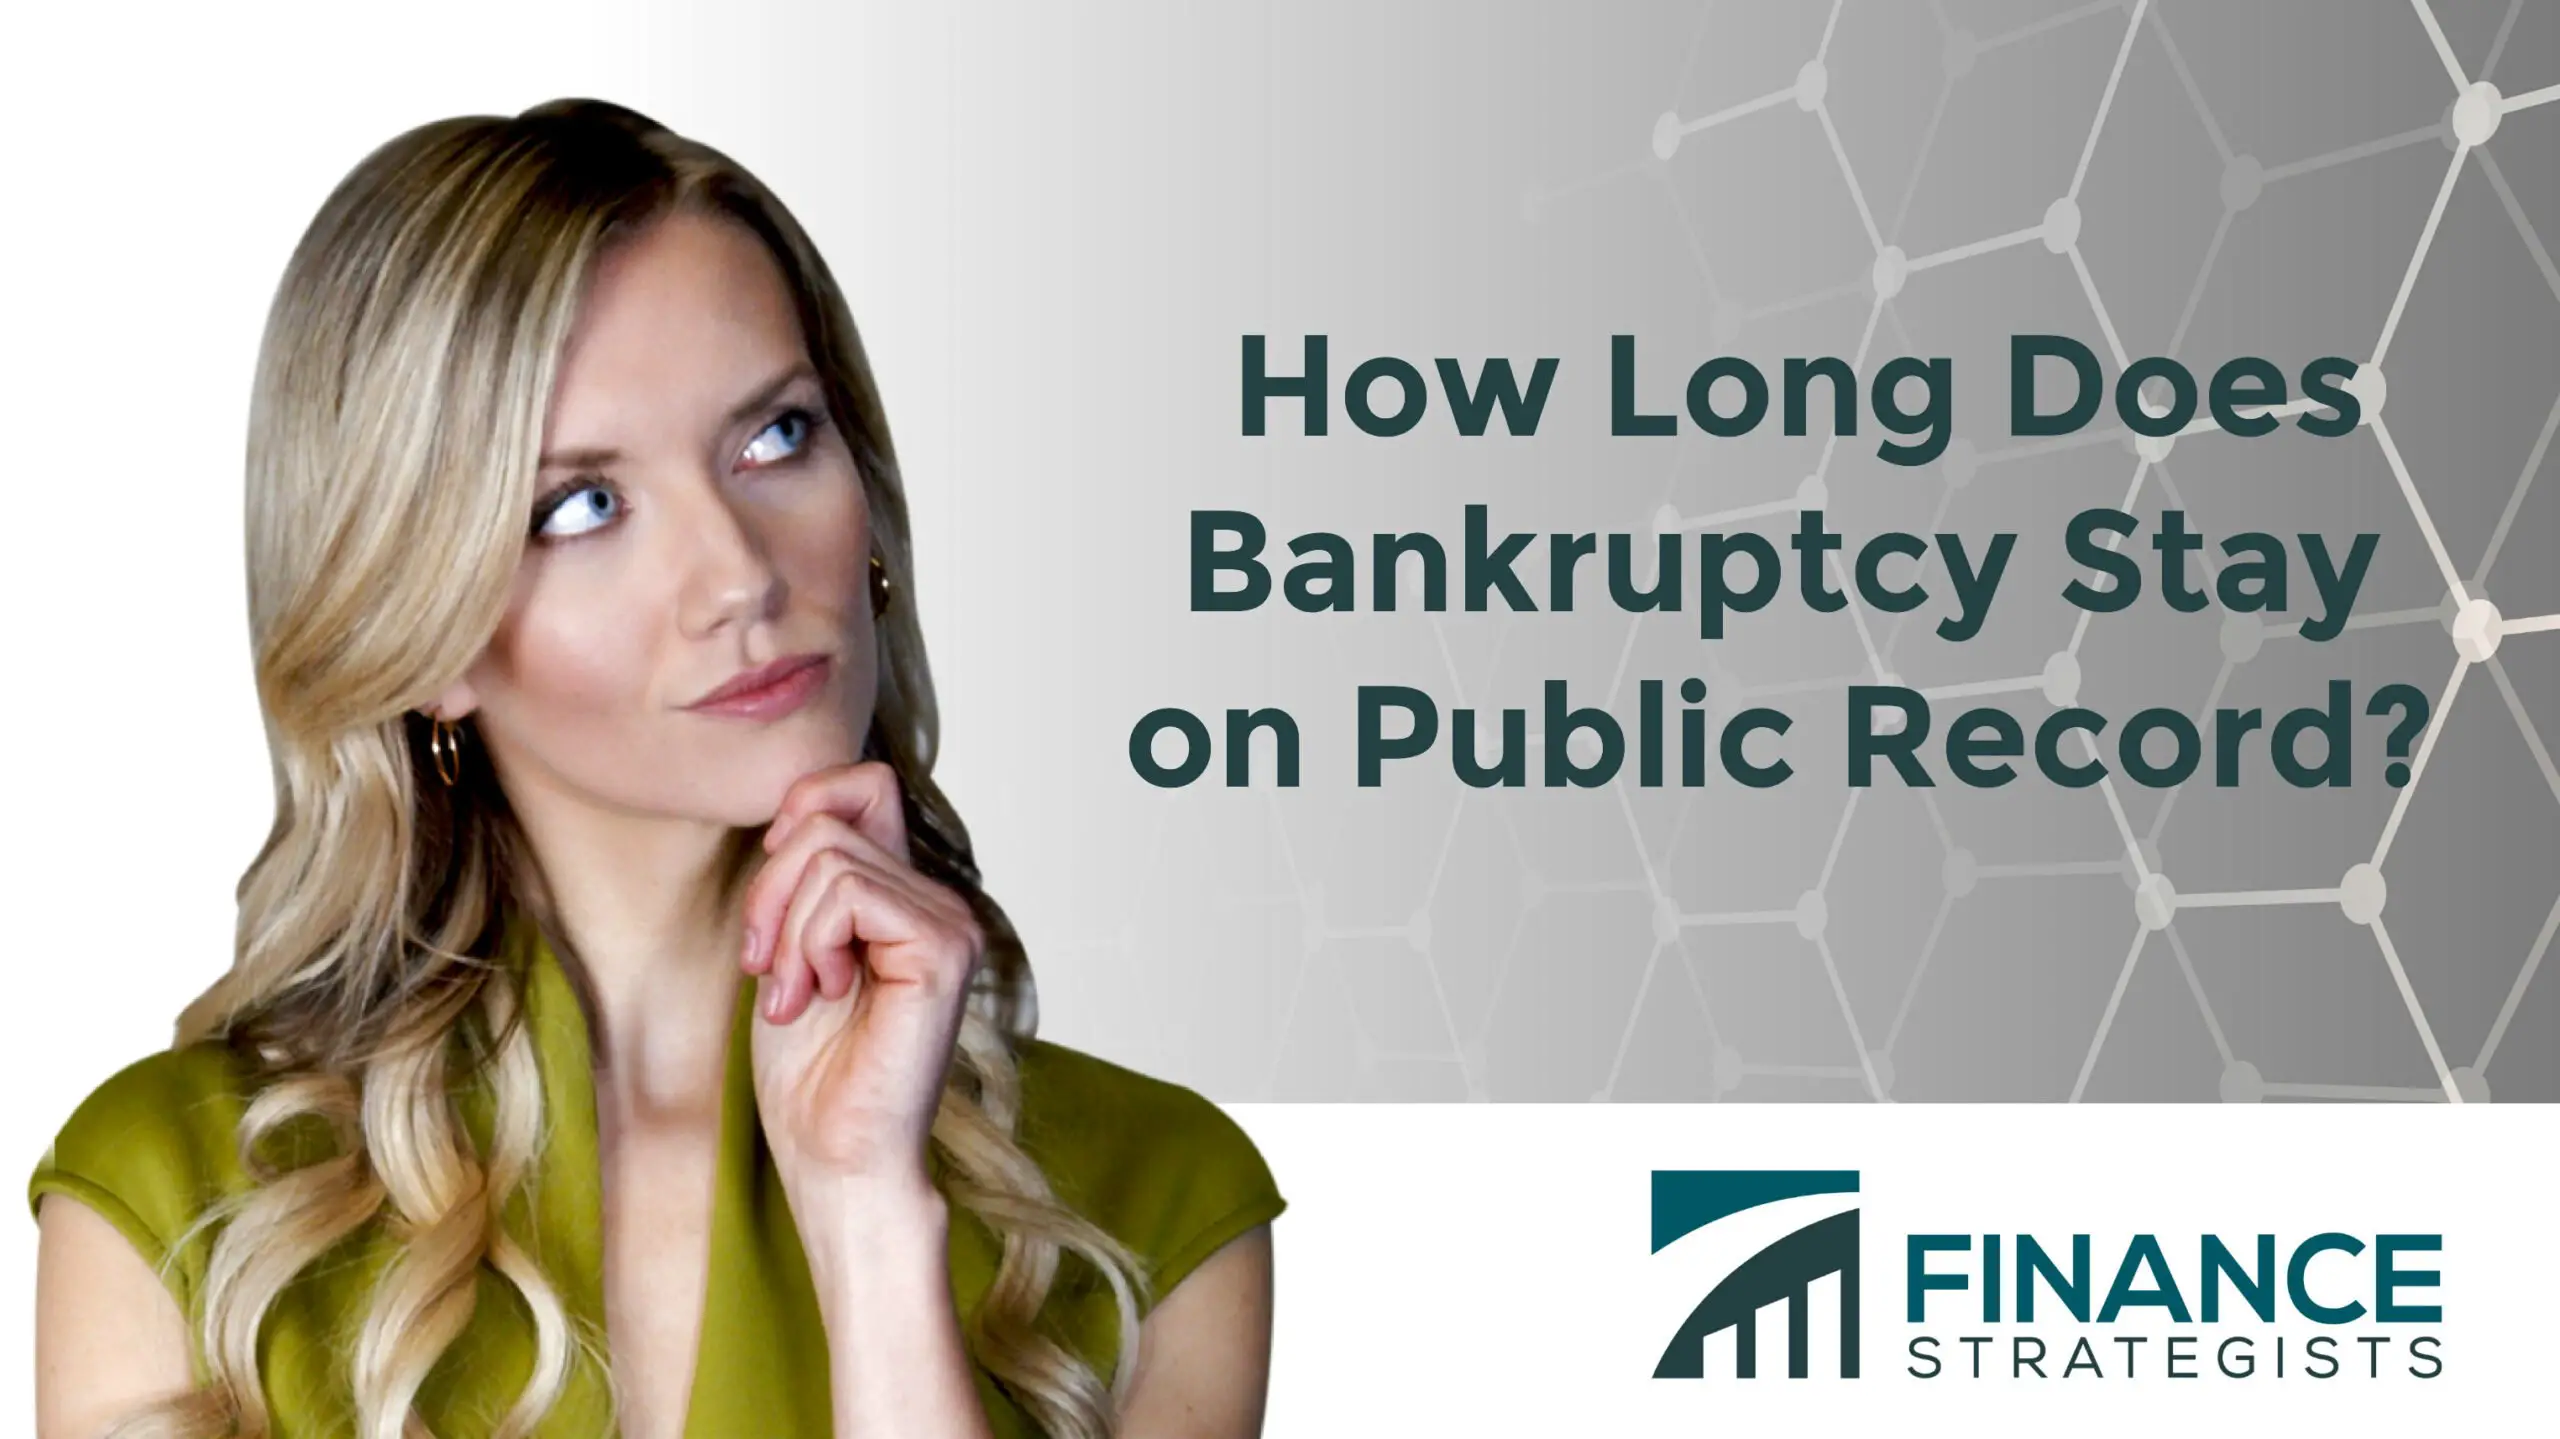 How Long Does Bankruptcy Stay on Public Record?